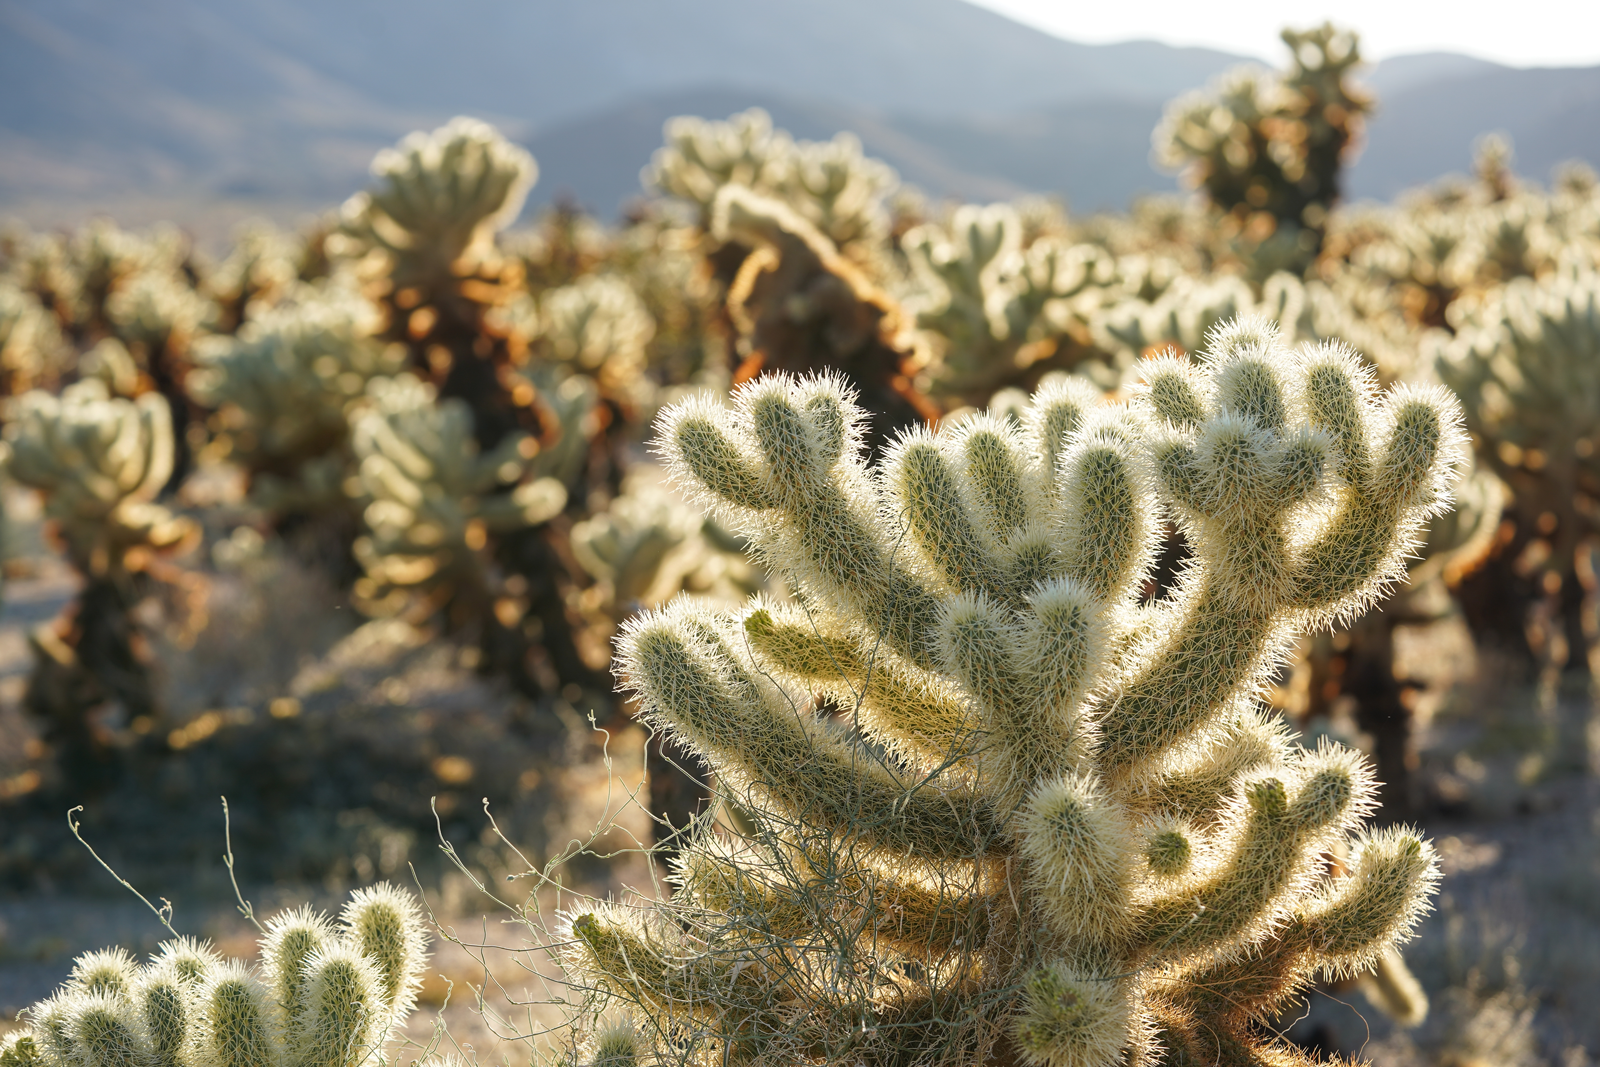 Chollas Cactus field in the desert of the Joshua Tree National Park